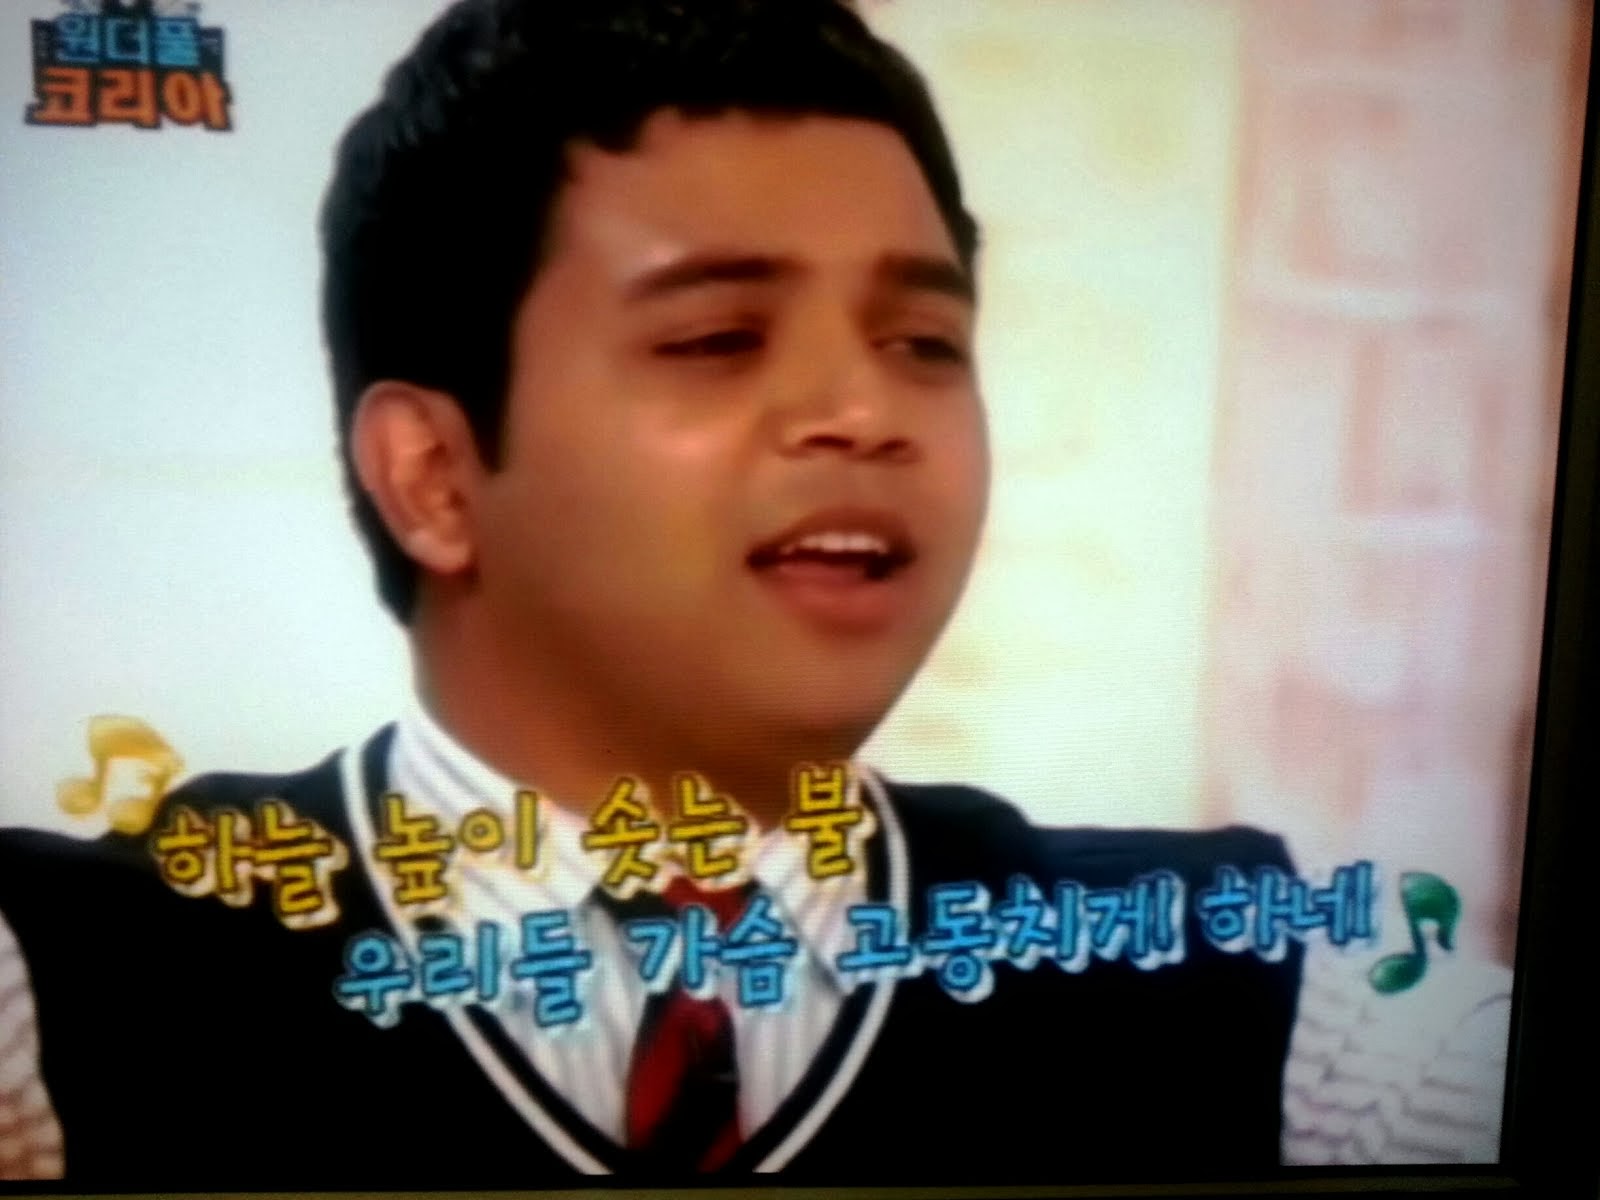 Olympic Song jtbc